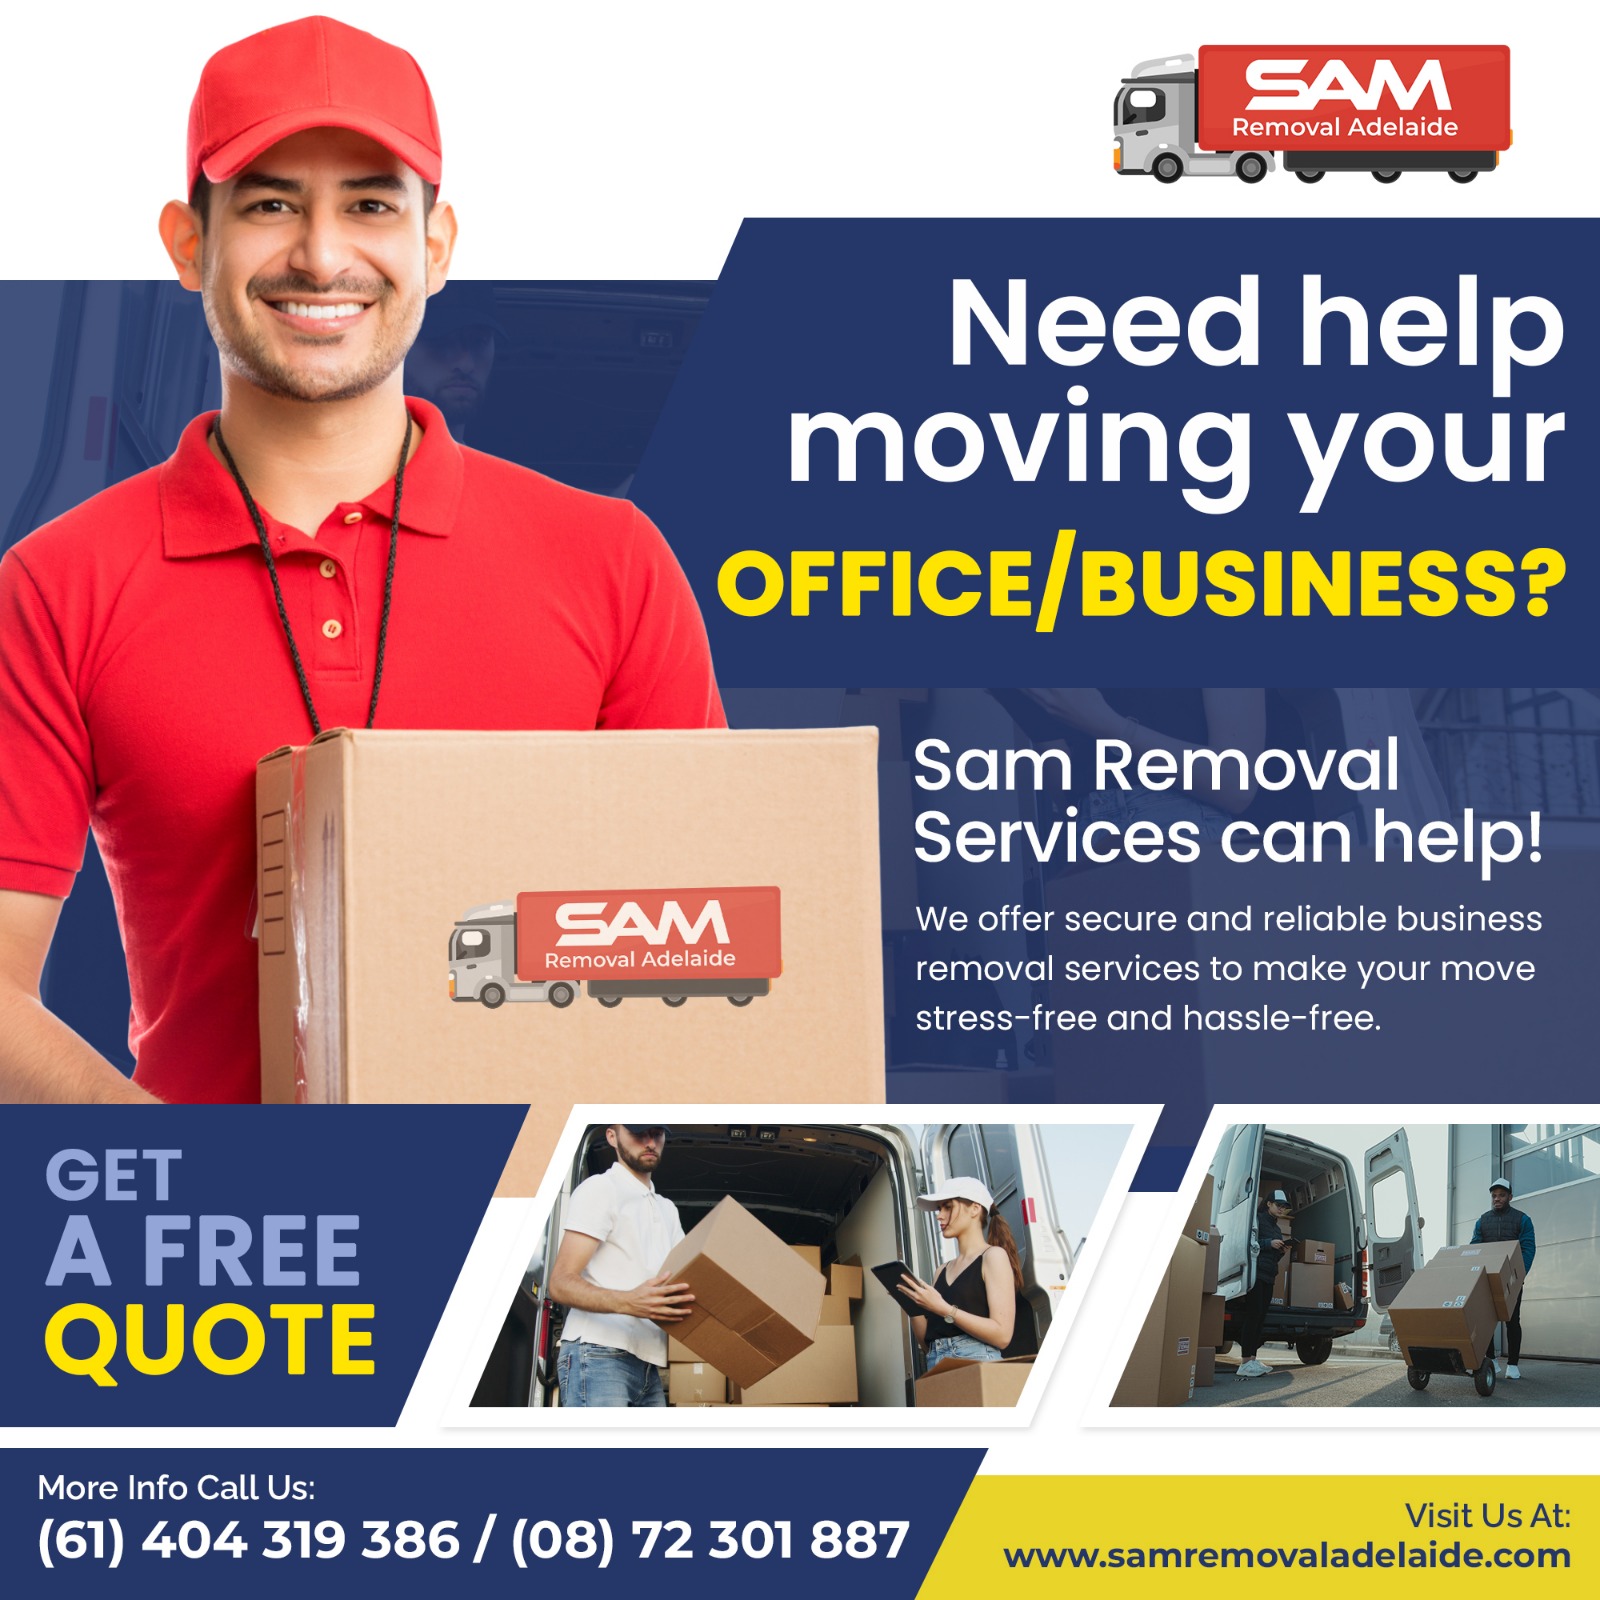 Office Removals: Moving Offices with Ease with Sam Removals Adelaide